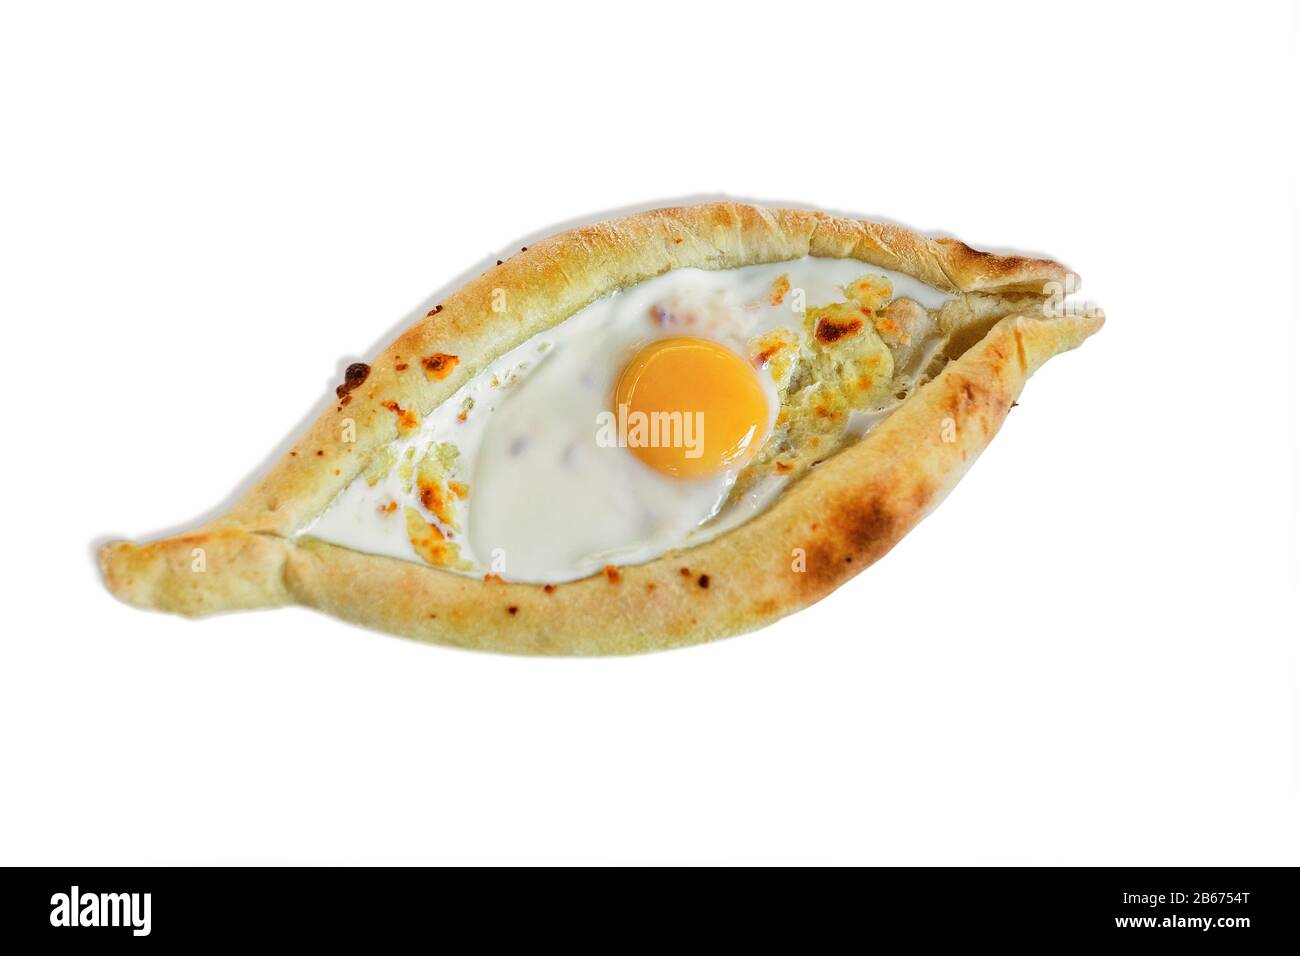 Ajarian delicious khachapuri in boat shape with egg isolated on white background Stock Photo